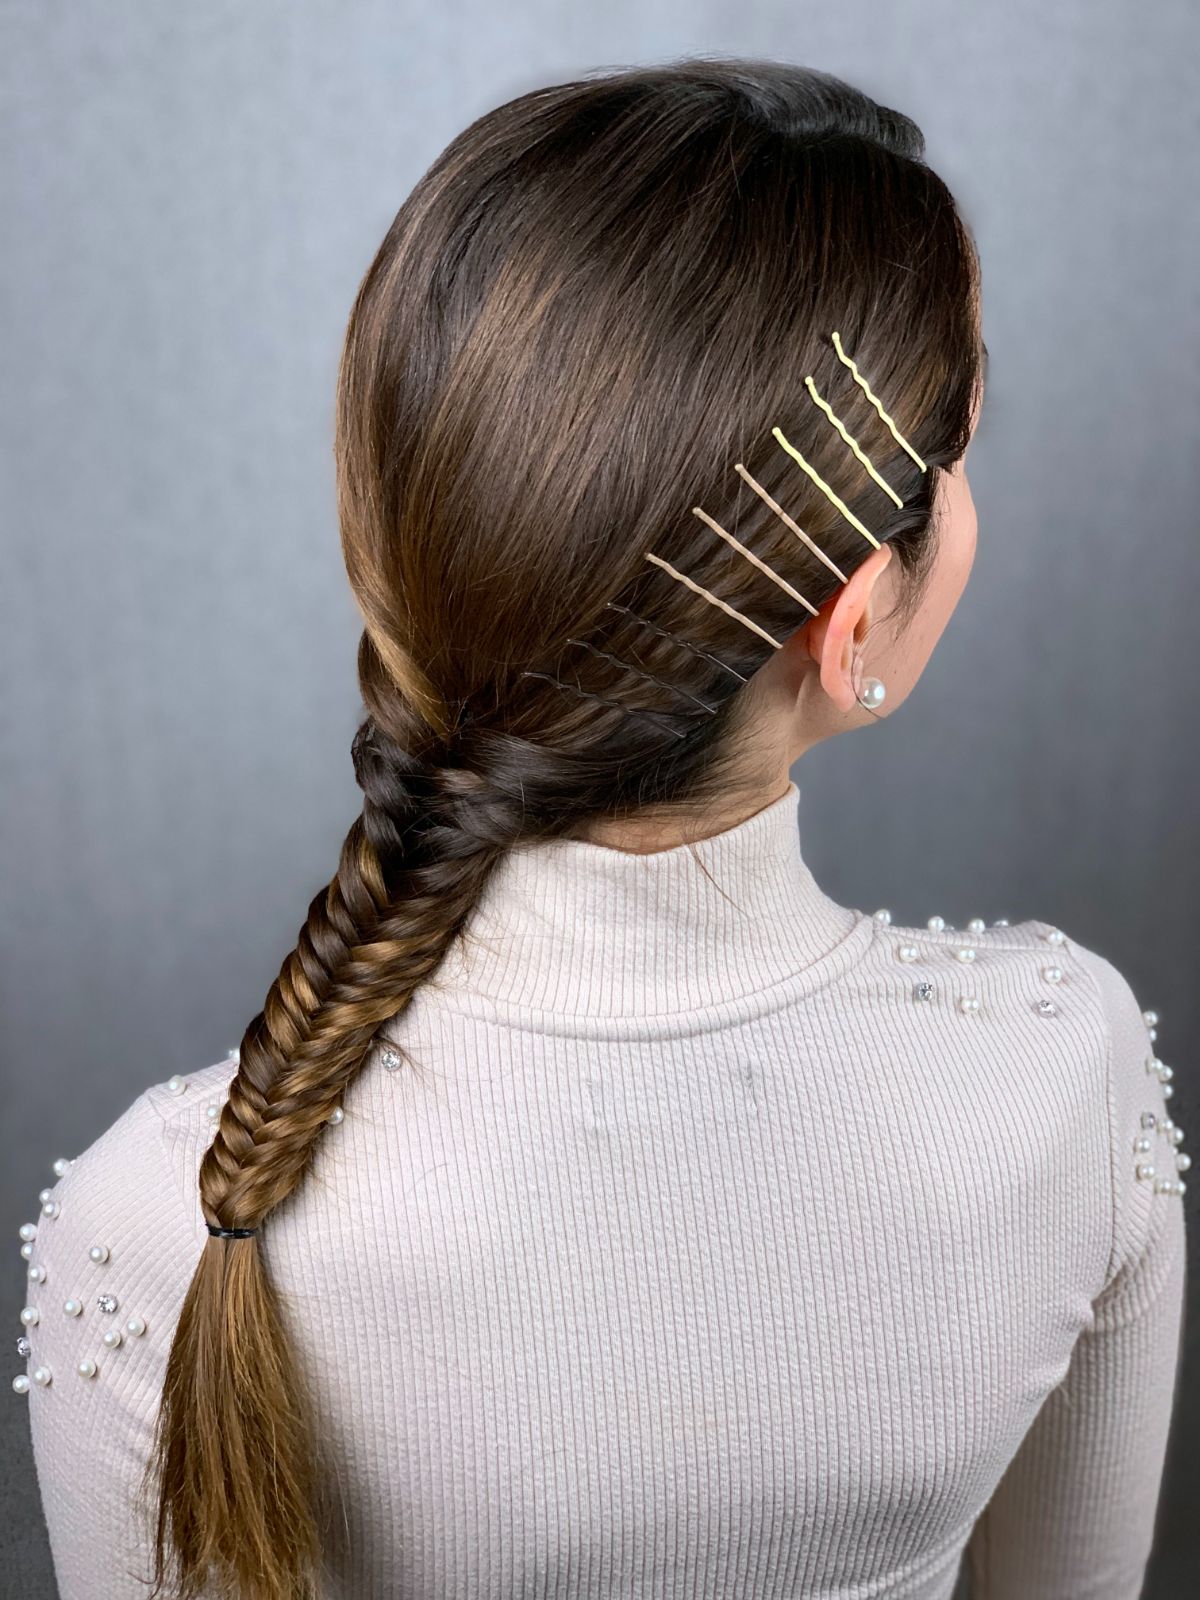 12 Easy Bobby Pin Hairstyles to Up Your Hair Game